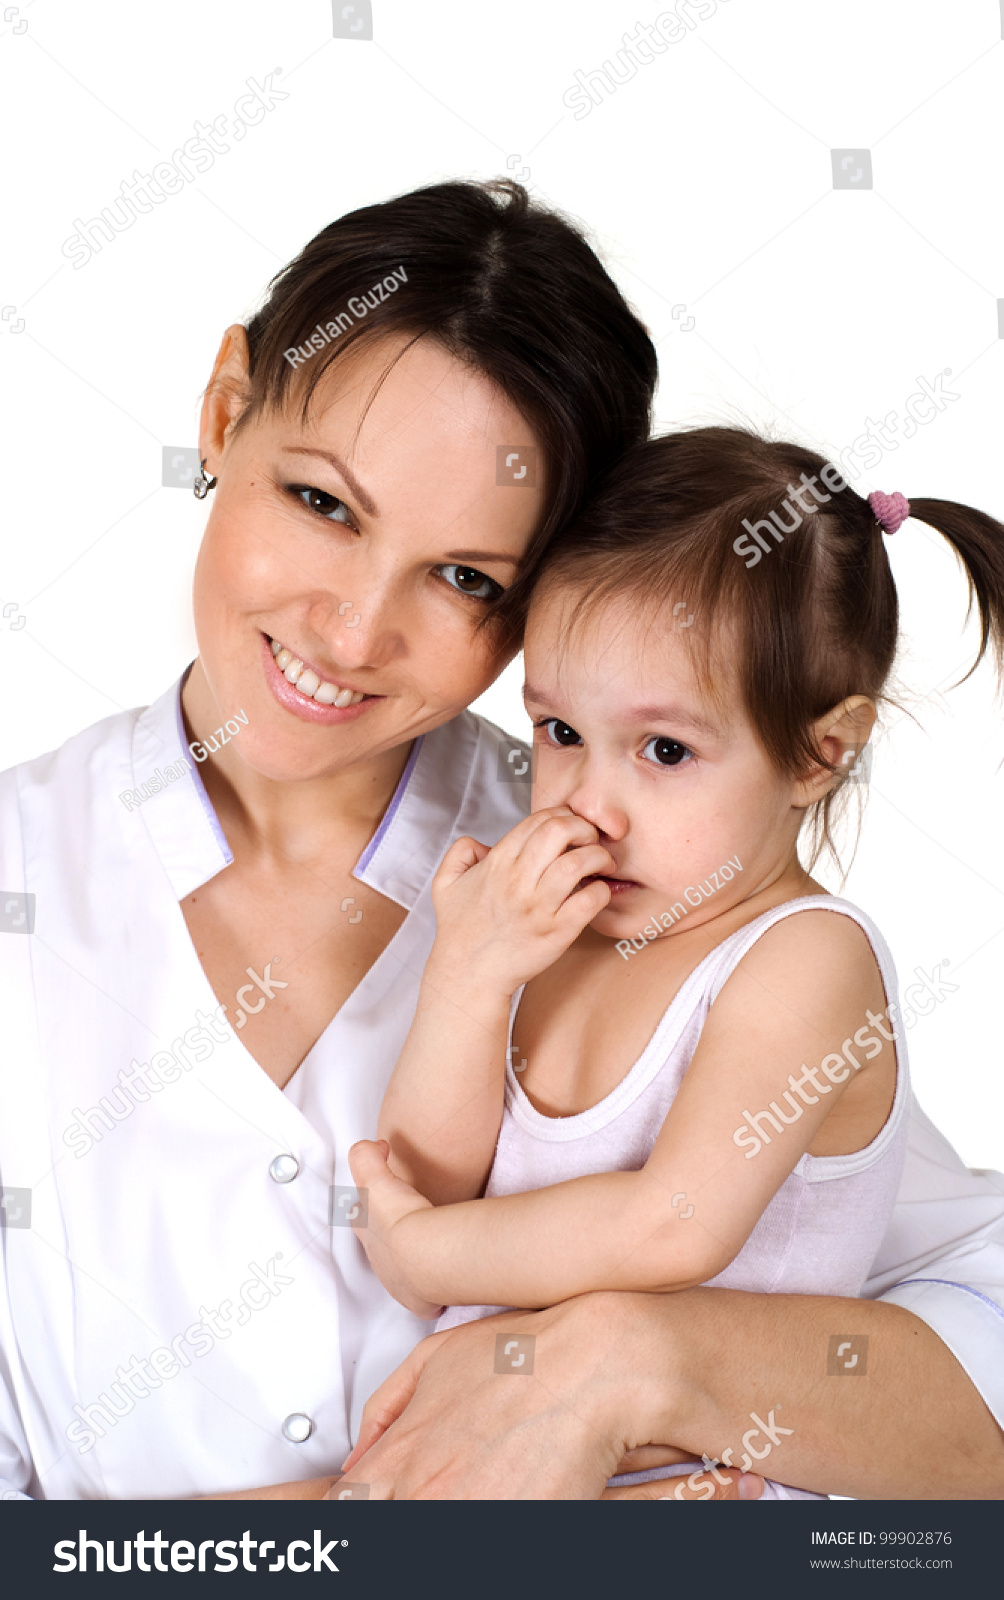 Beautiful Smiling Caucasian Nurse Holding A Baby Girl On A ...